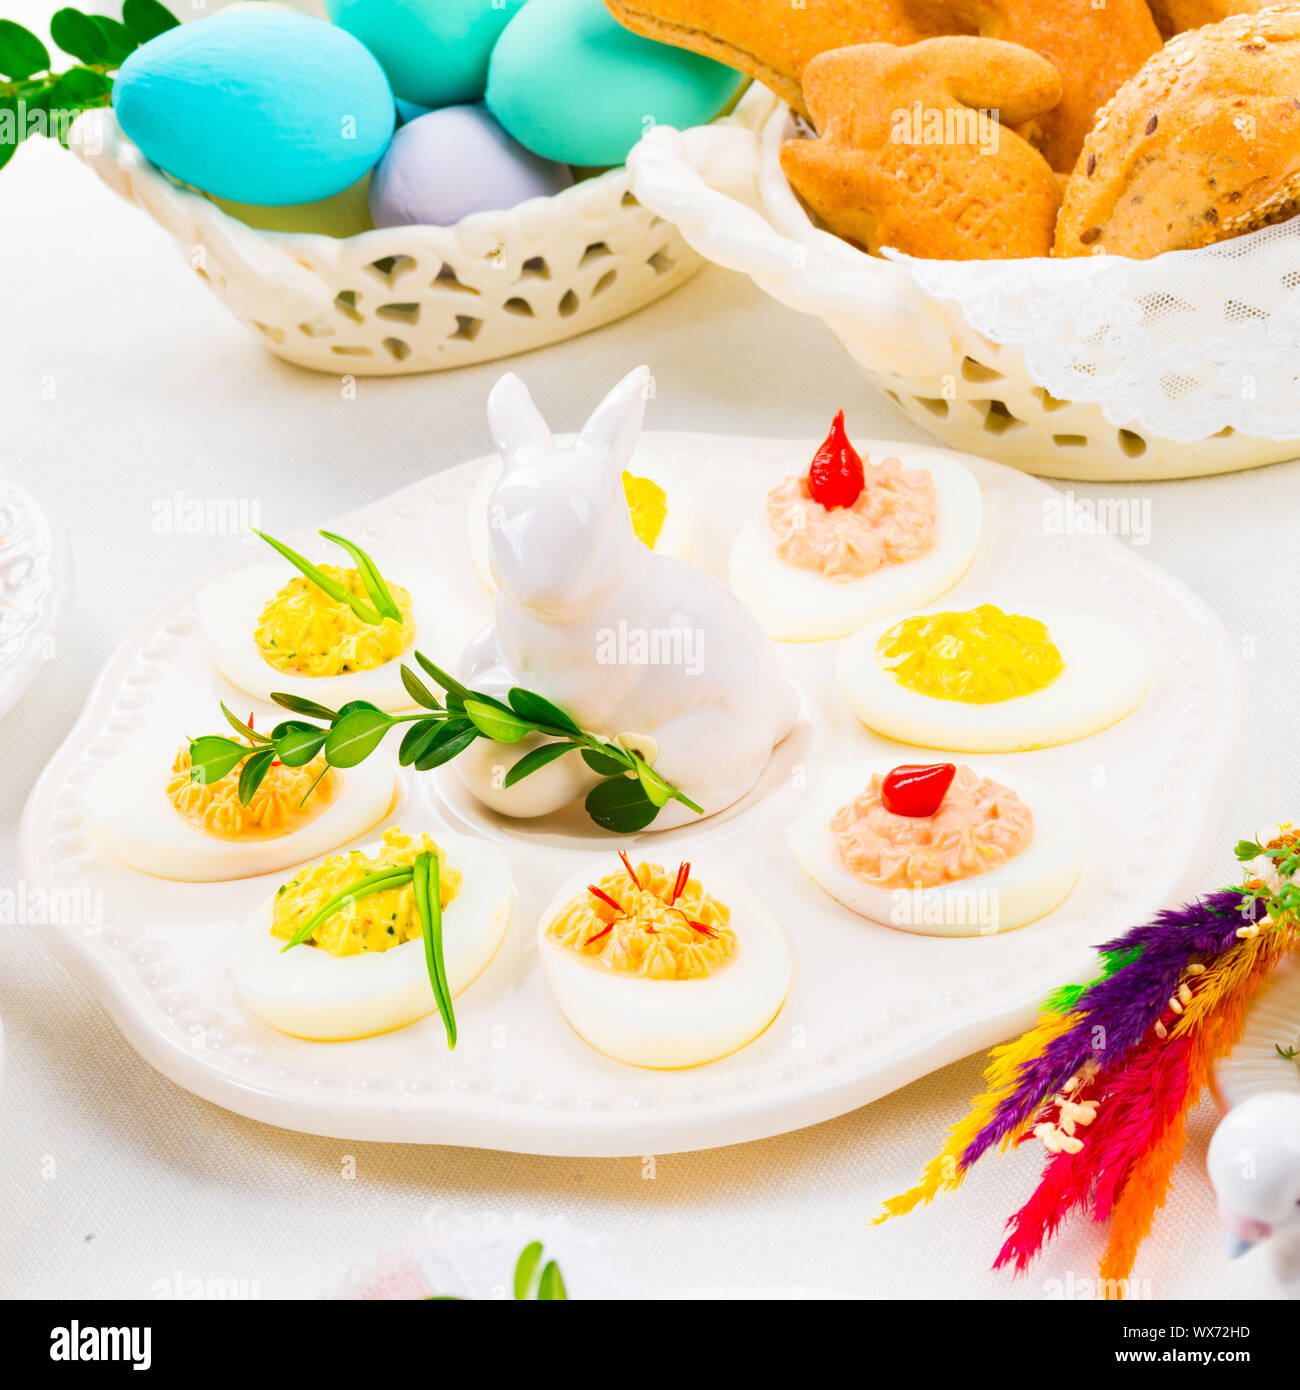 a colorful and festive Easter table decoration Stock Photo